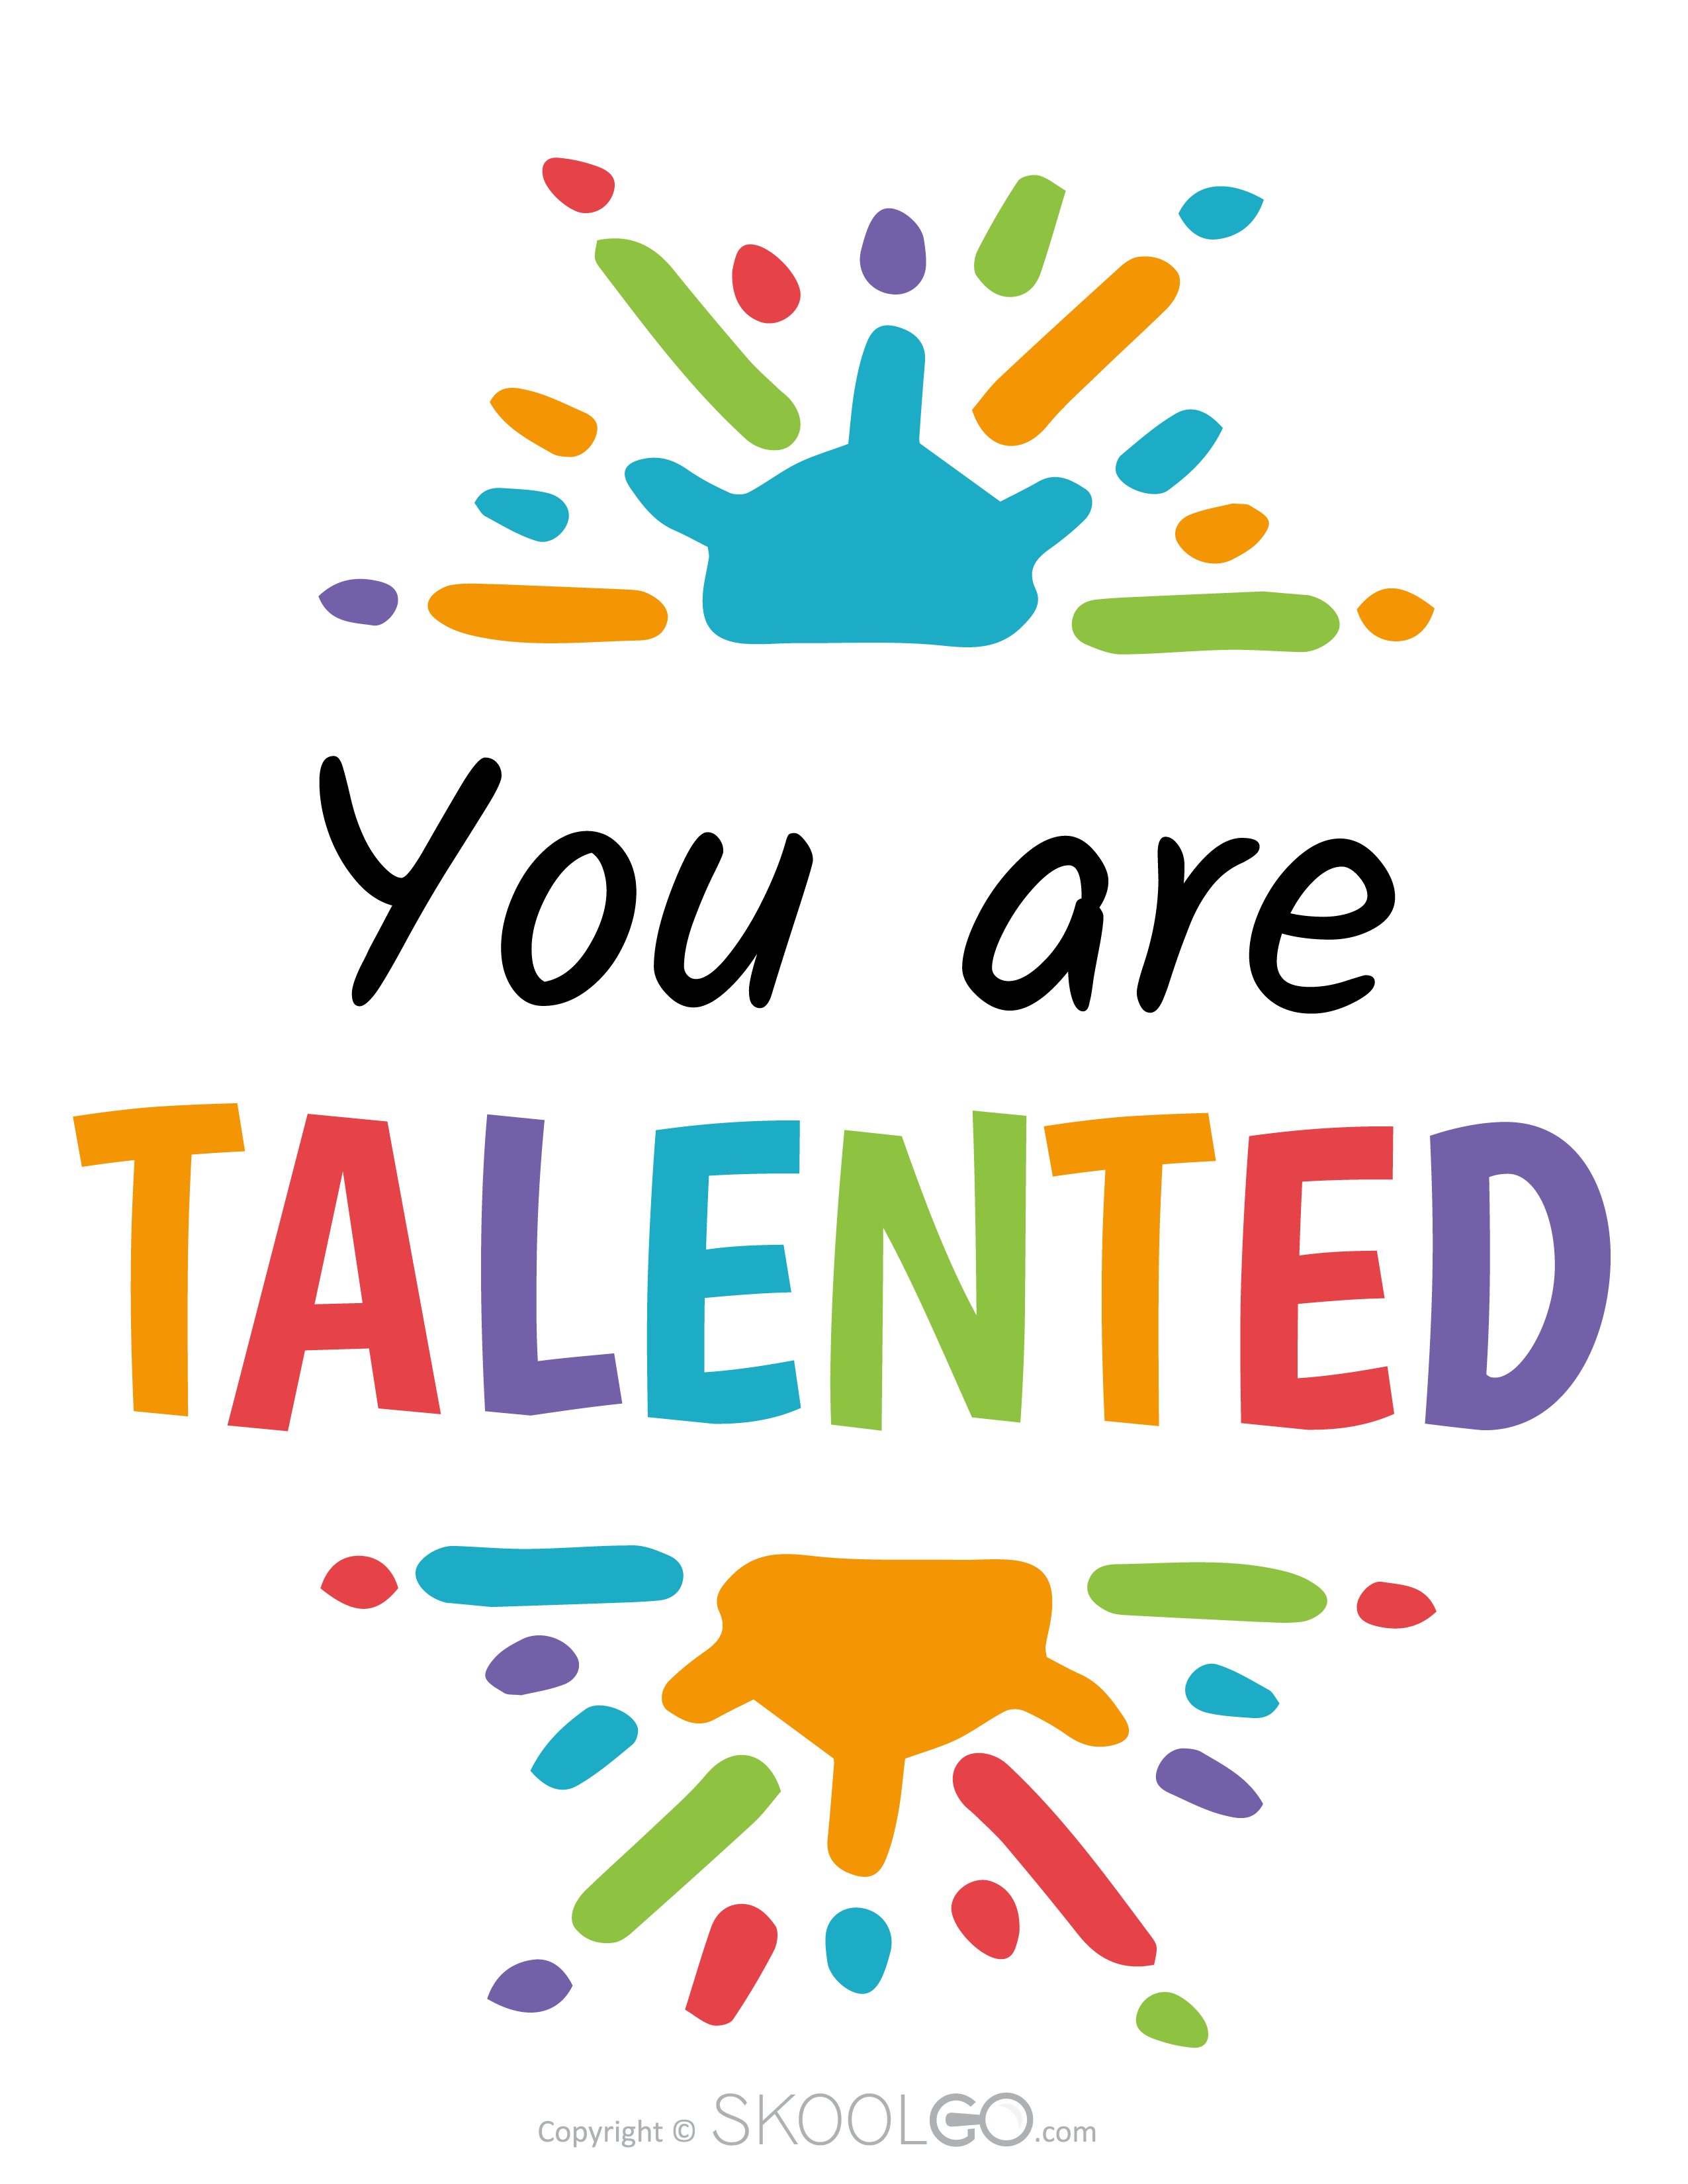 You Are Talented - Free Poster